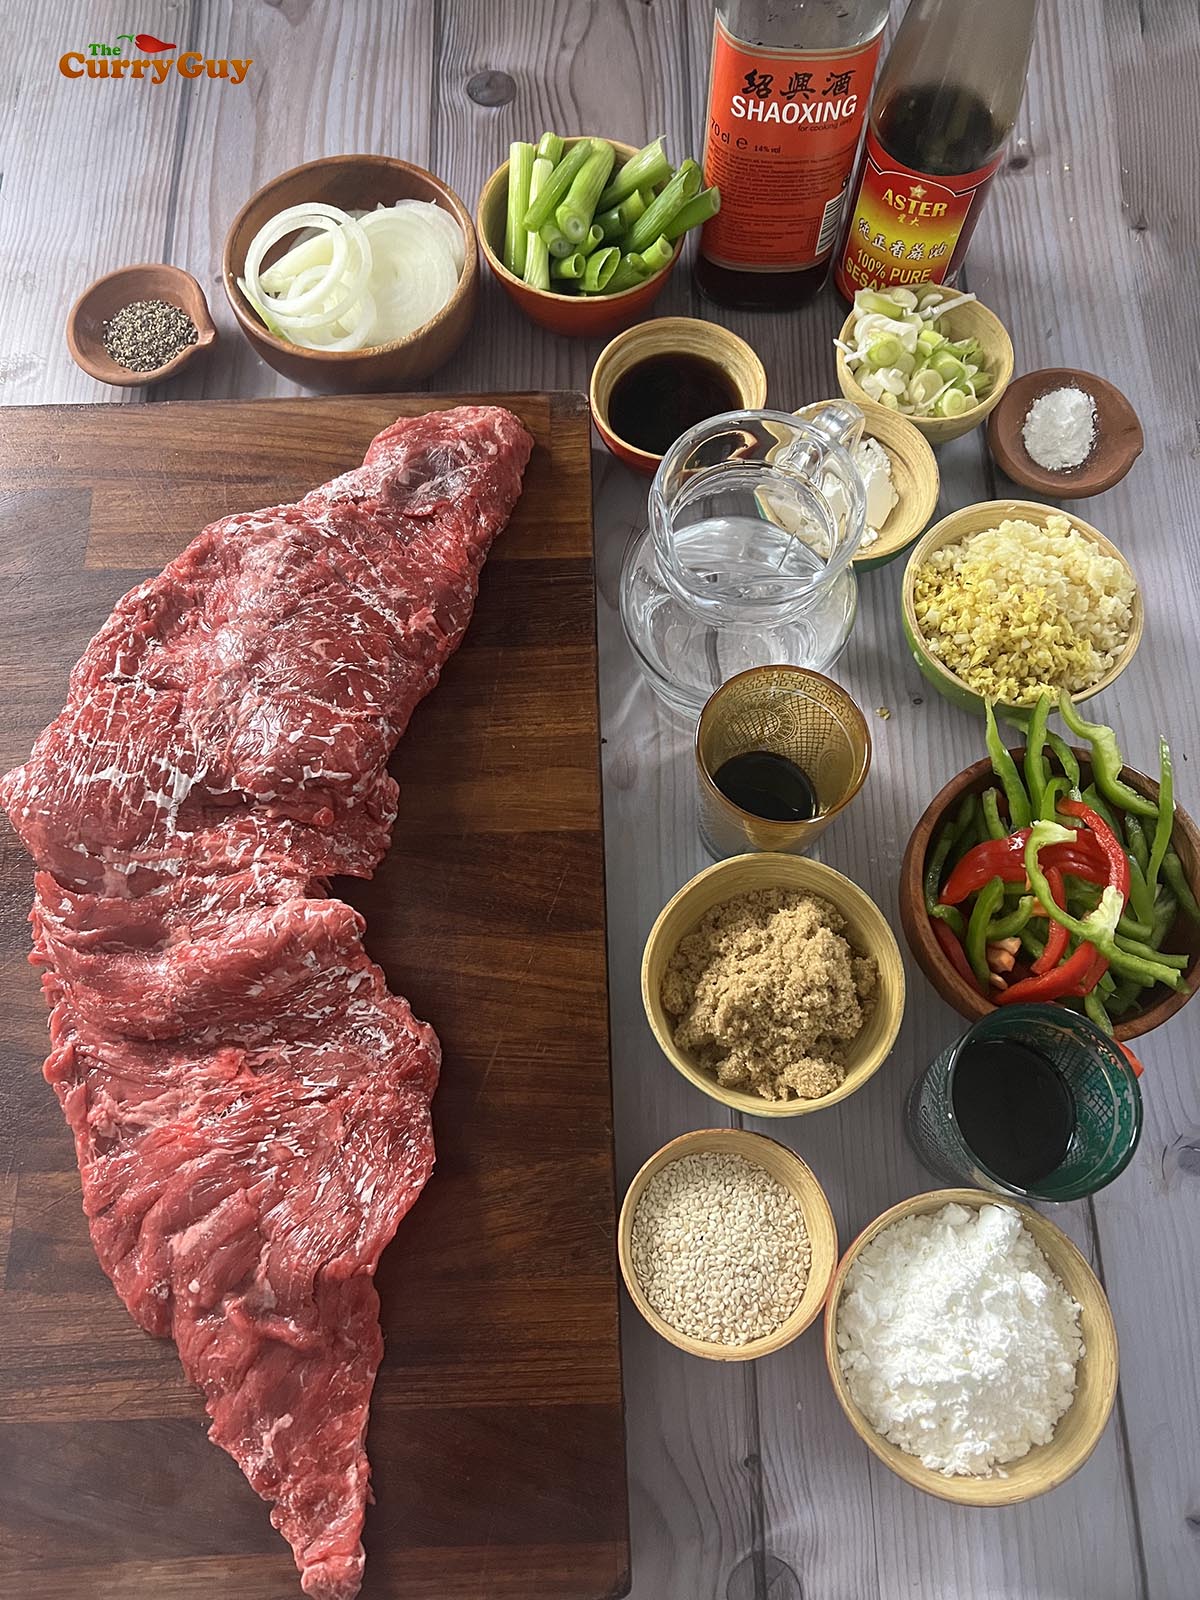 Ingredients for the Mongolian beef recipe.